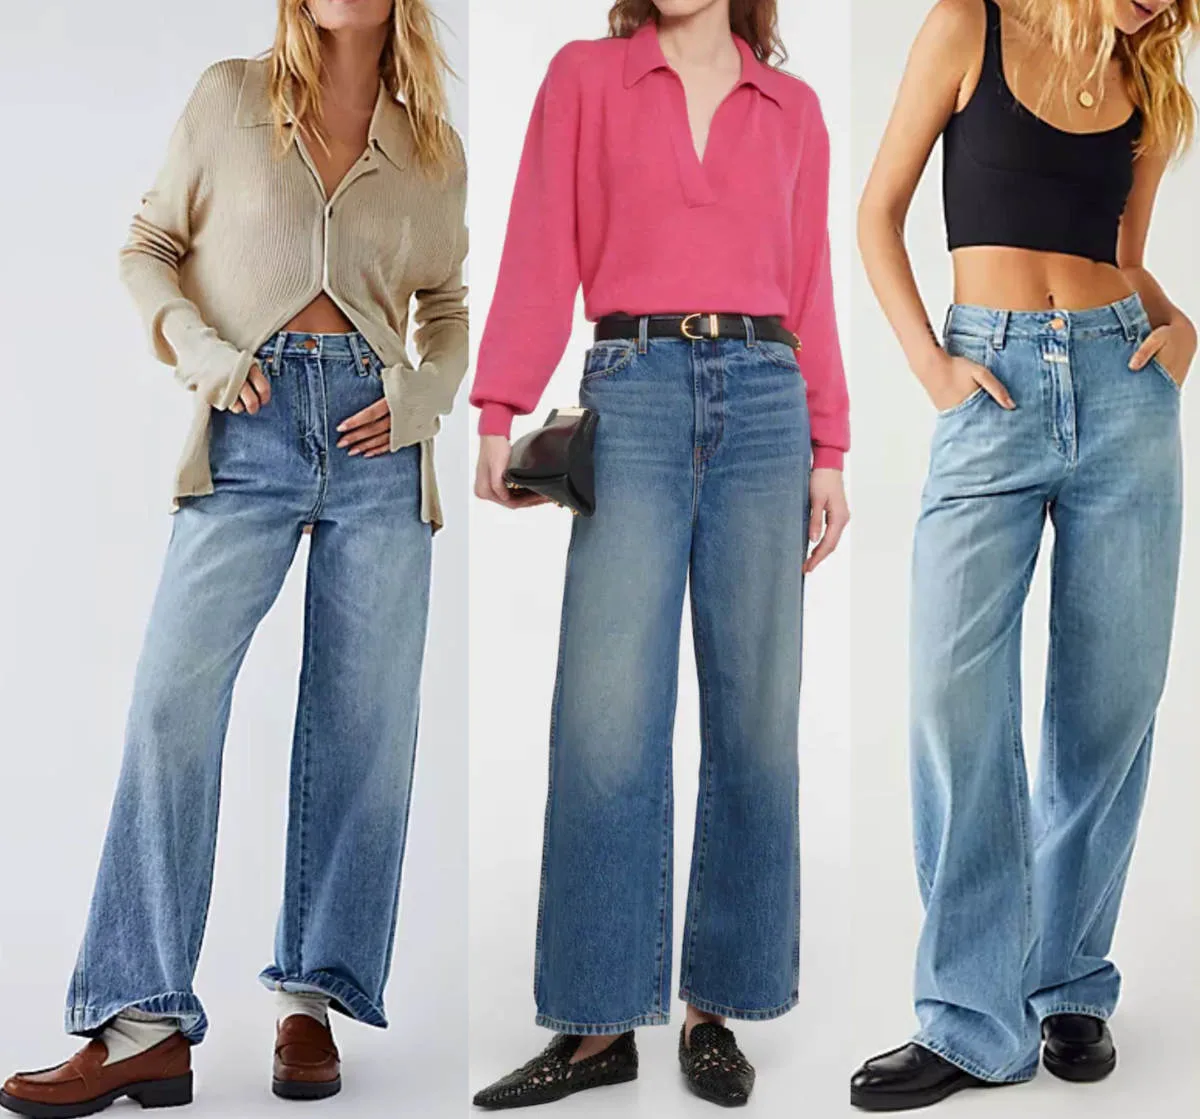 3 women wearing loafer shoes with baggy jeans outfits.